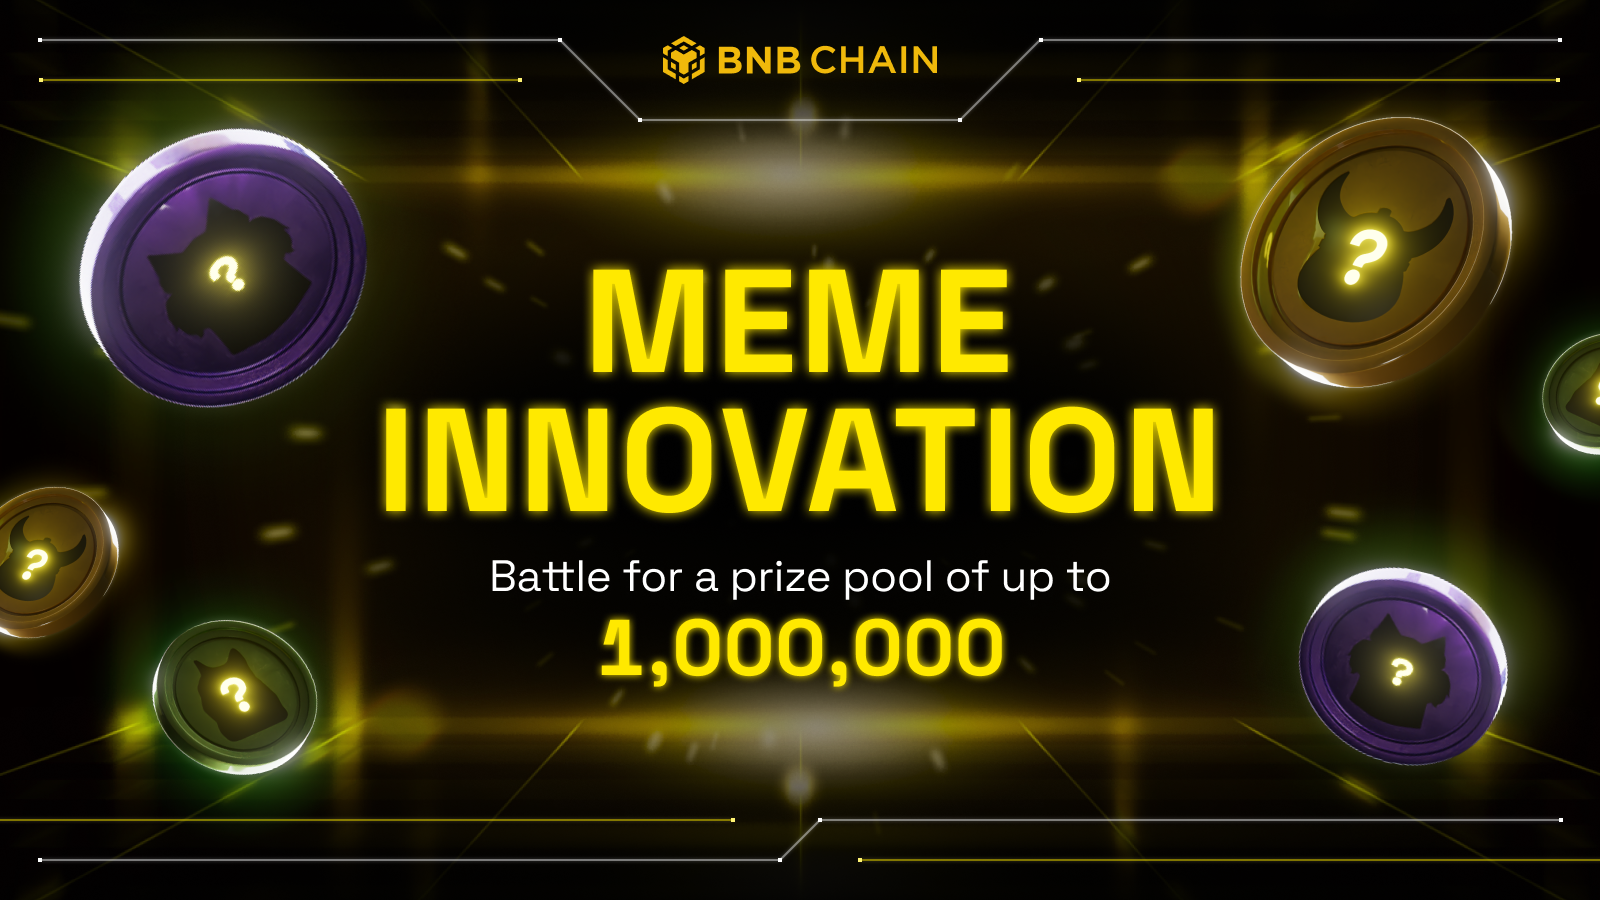 BNB Chain Meme Innovation – Battle for a prize pool of up to 1M